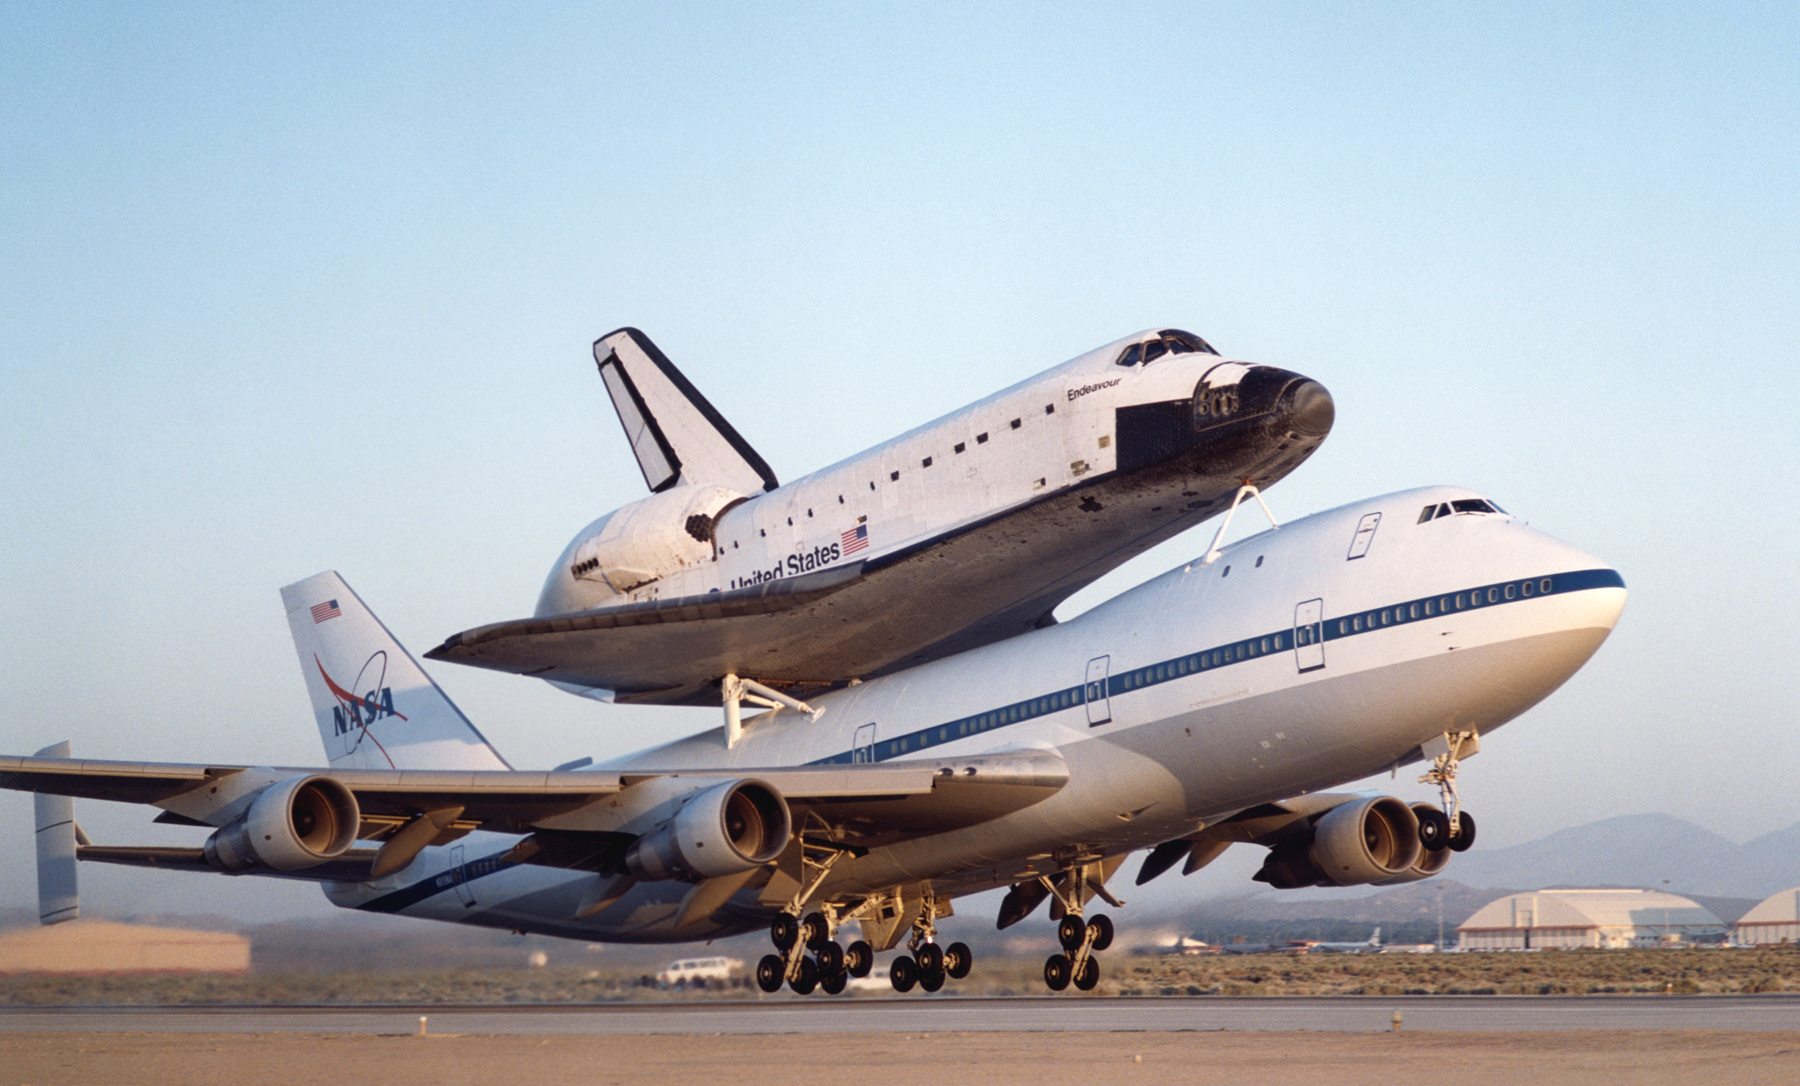 A NASA Space Shuttle Carrier Aircraft takes off from Edwards Air Force Base, California with the Space Shuttle Orbiter Endeavour. (NASA)